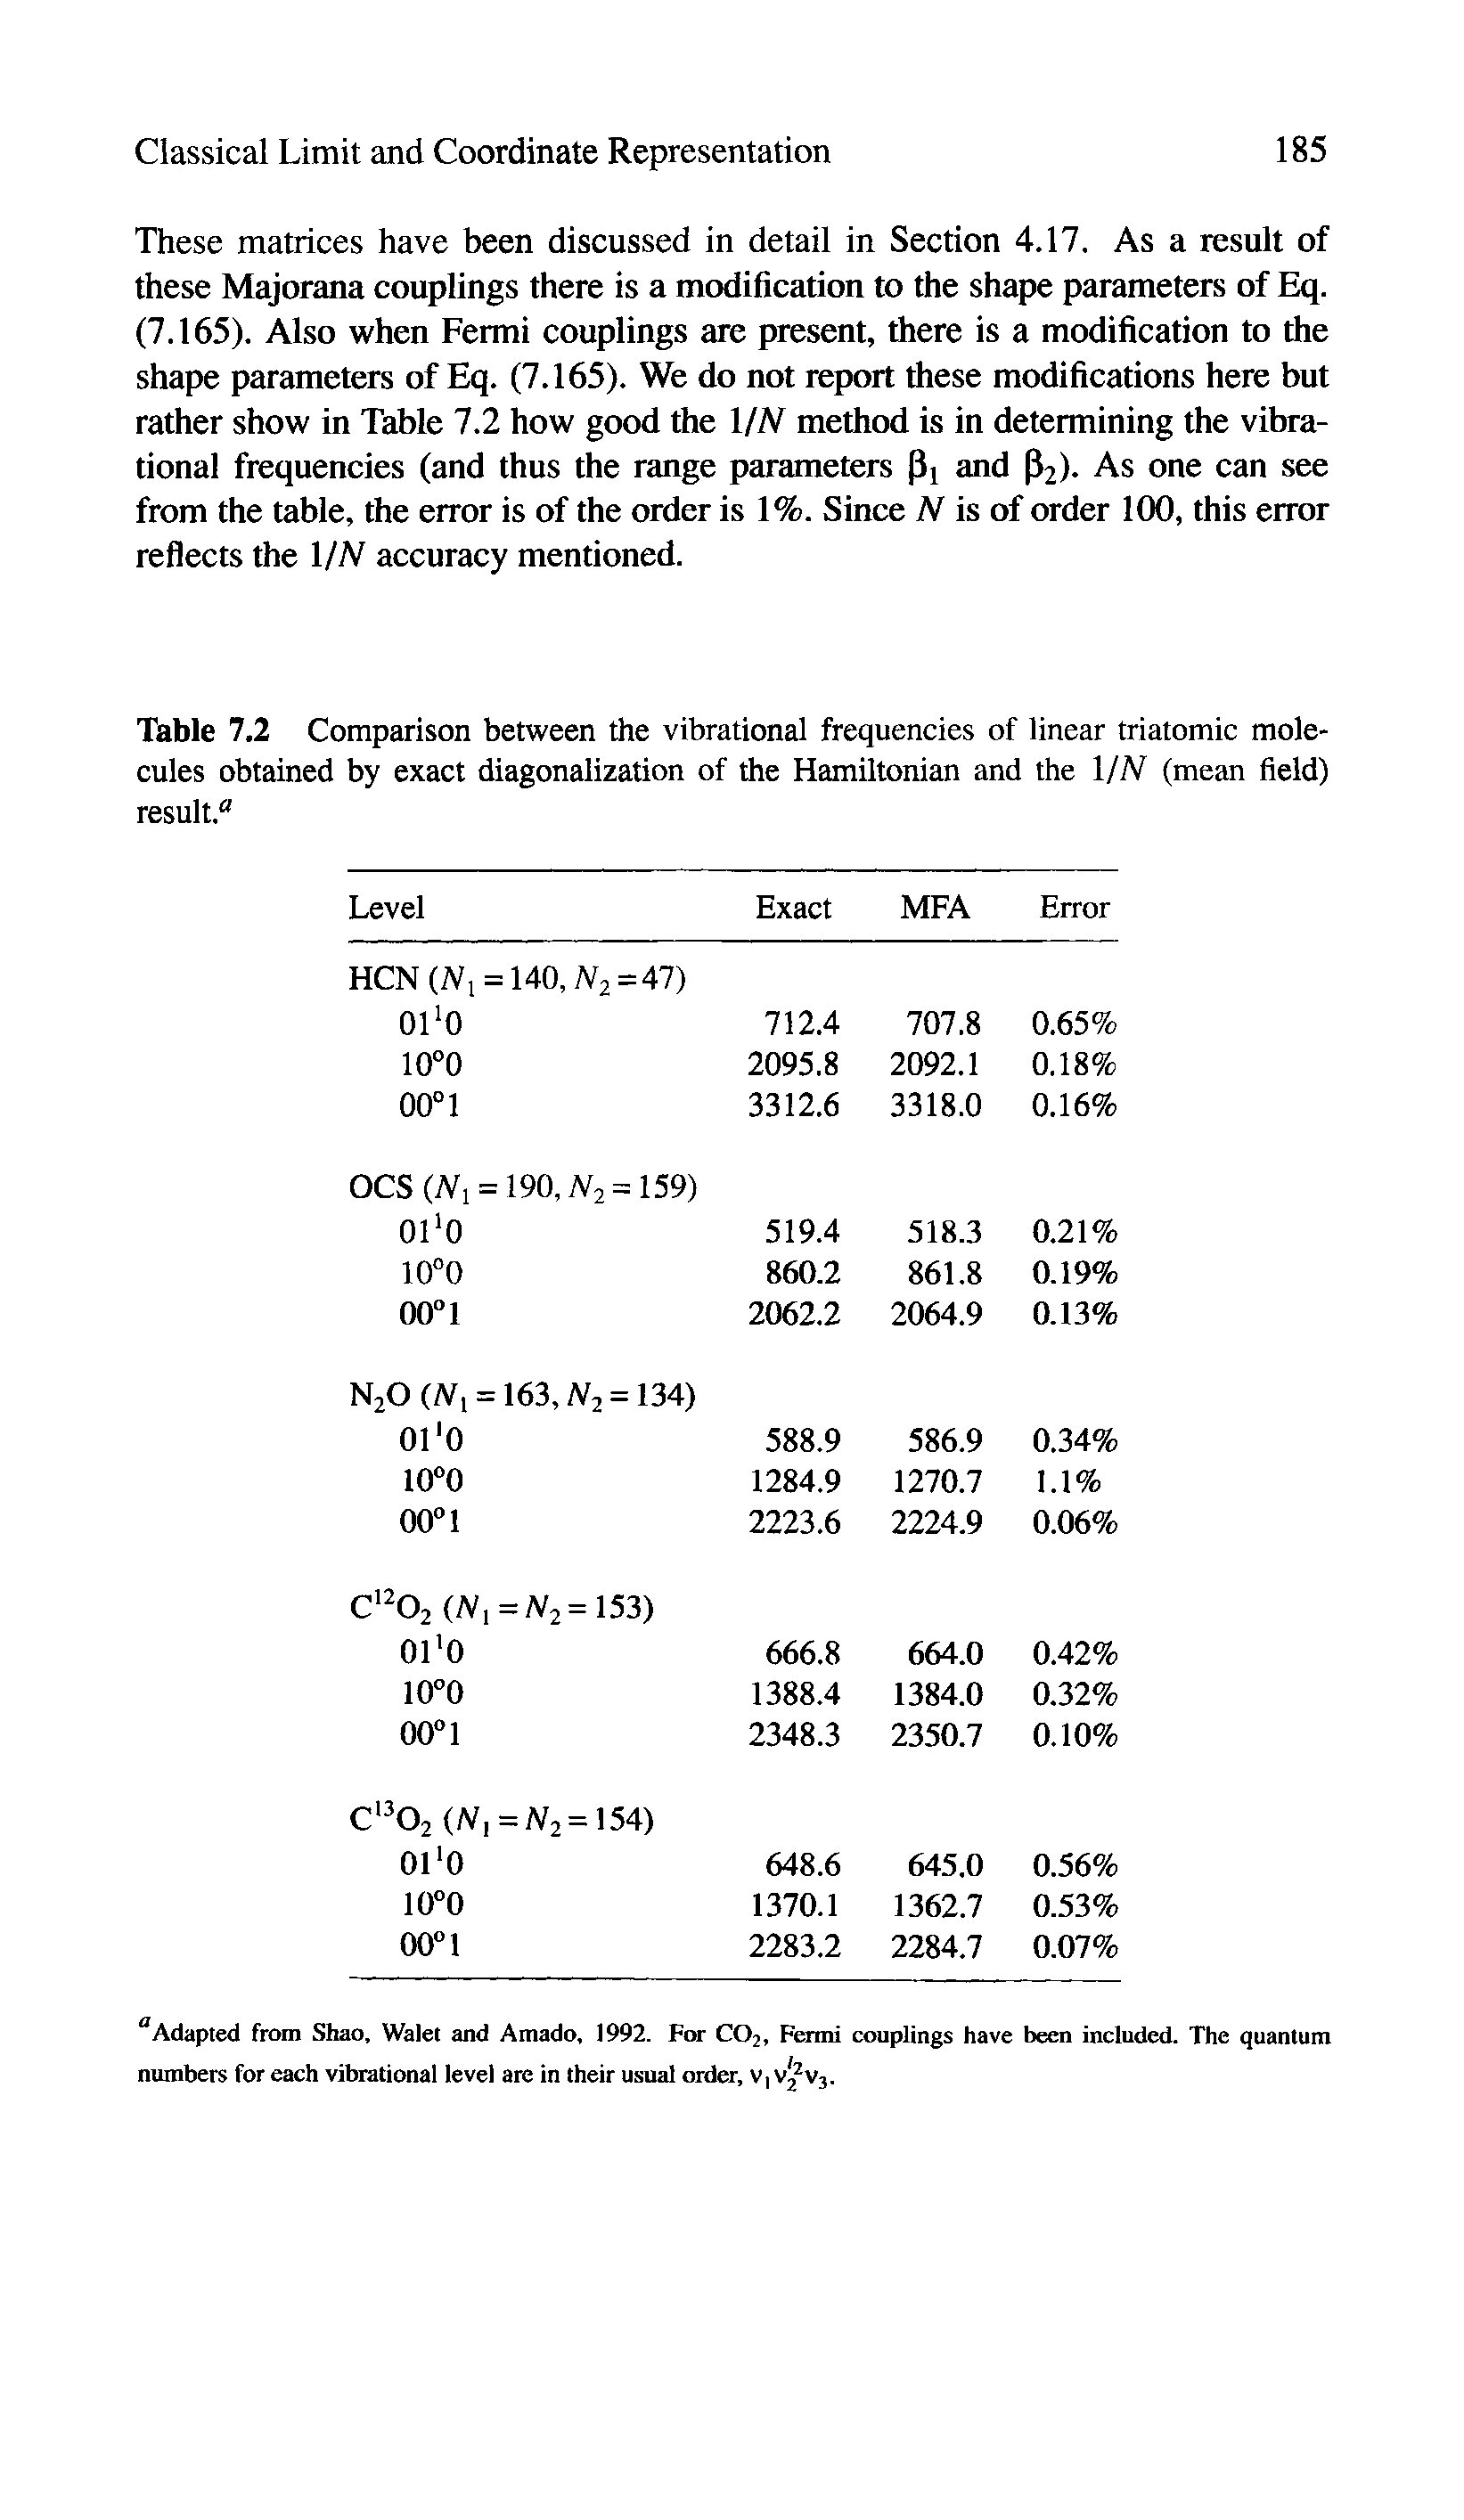 Table 7.2 Comparison between the vibrational frequencies of linear triatomic molecules obtained by exact diagonalization of the Hamiltonian and the l/N (mean field) result."...